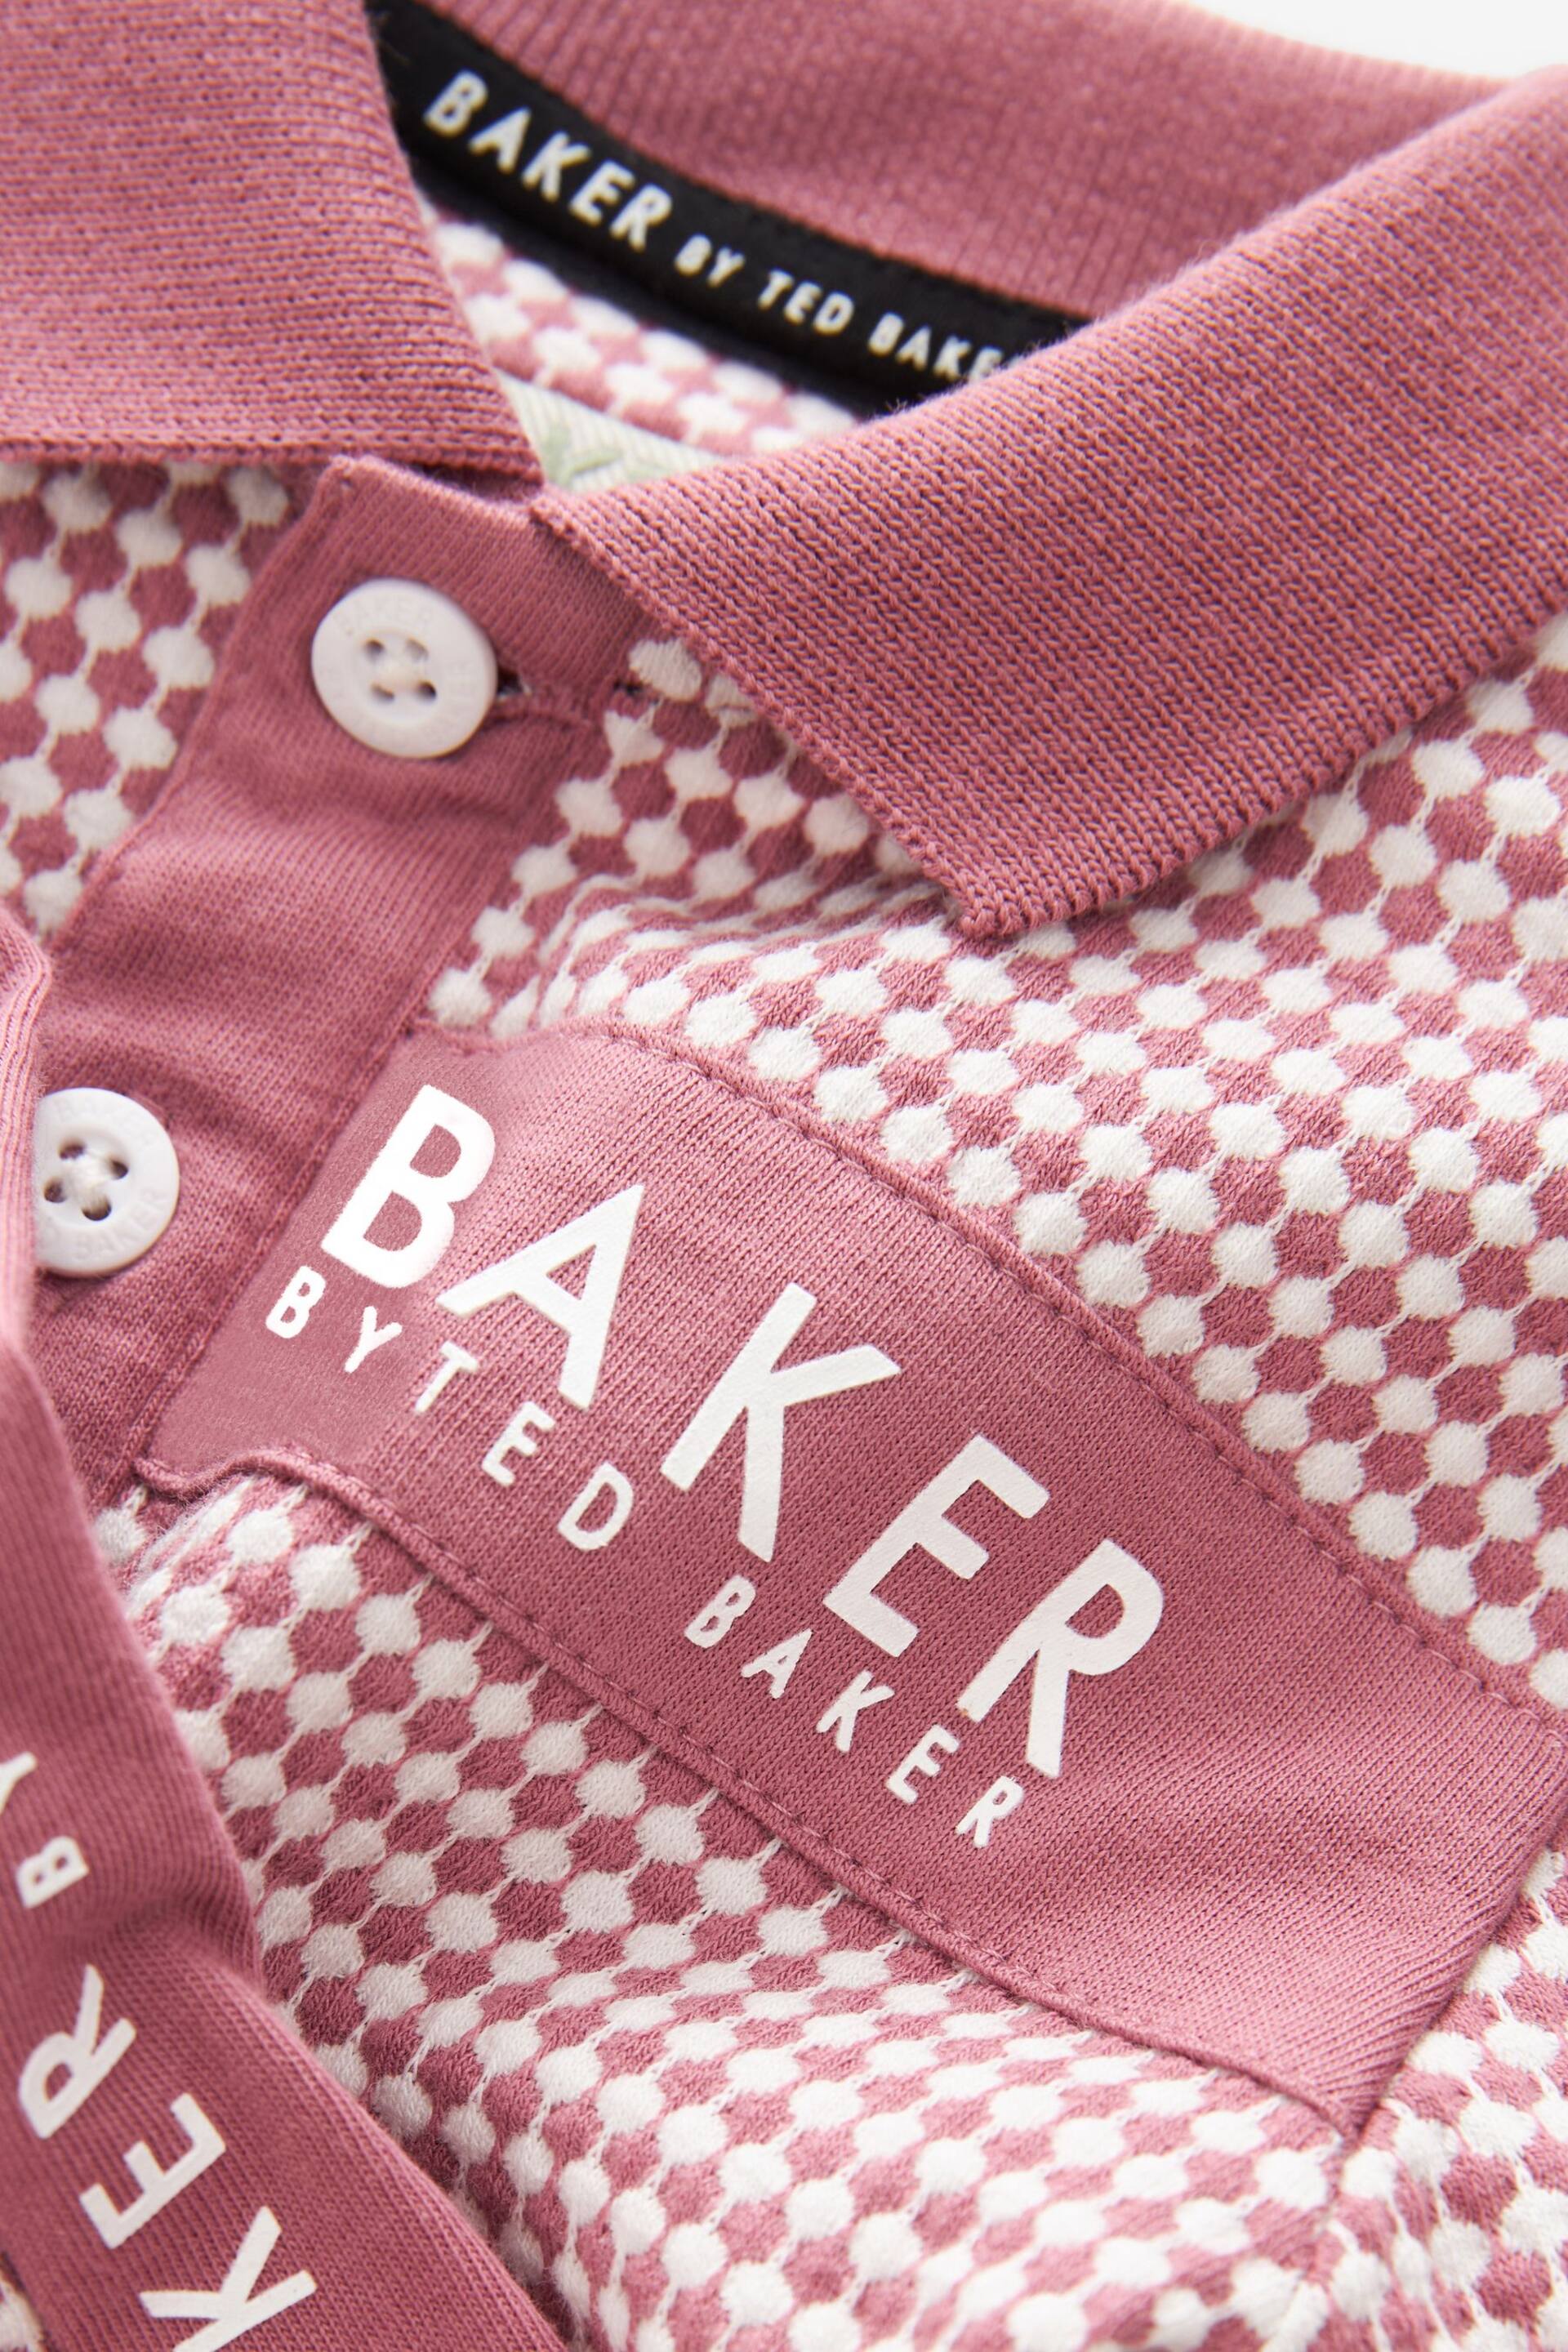 Baker by Ted Baker Textured Polo Shirt and Short Set - Image 15 of 16